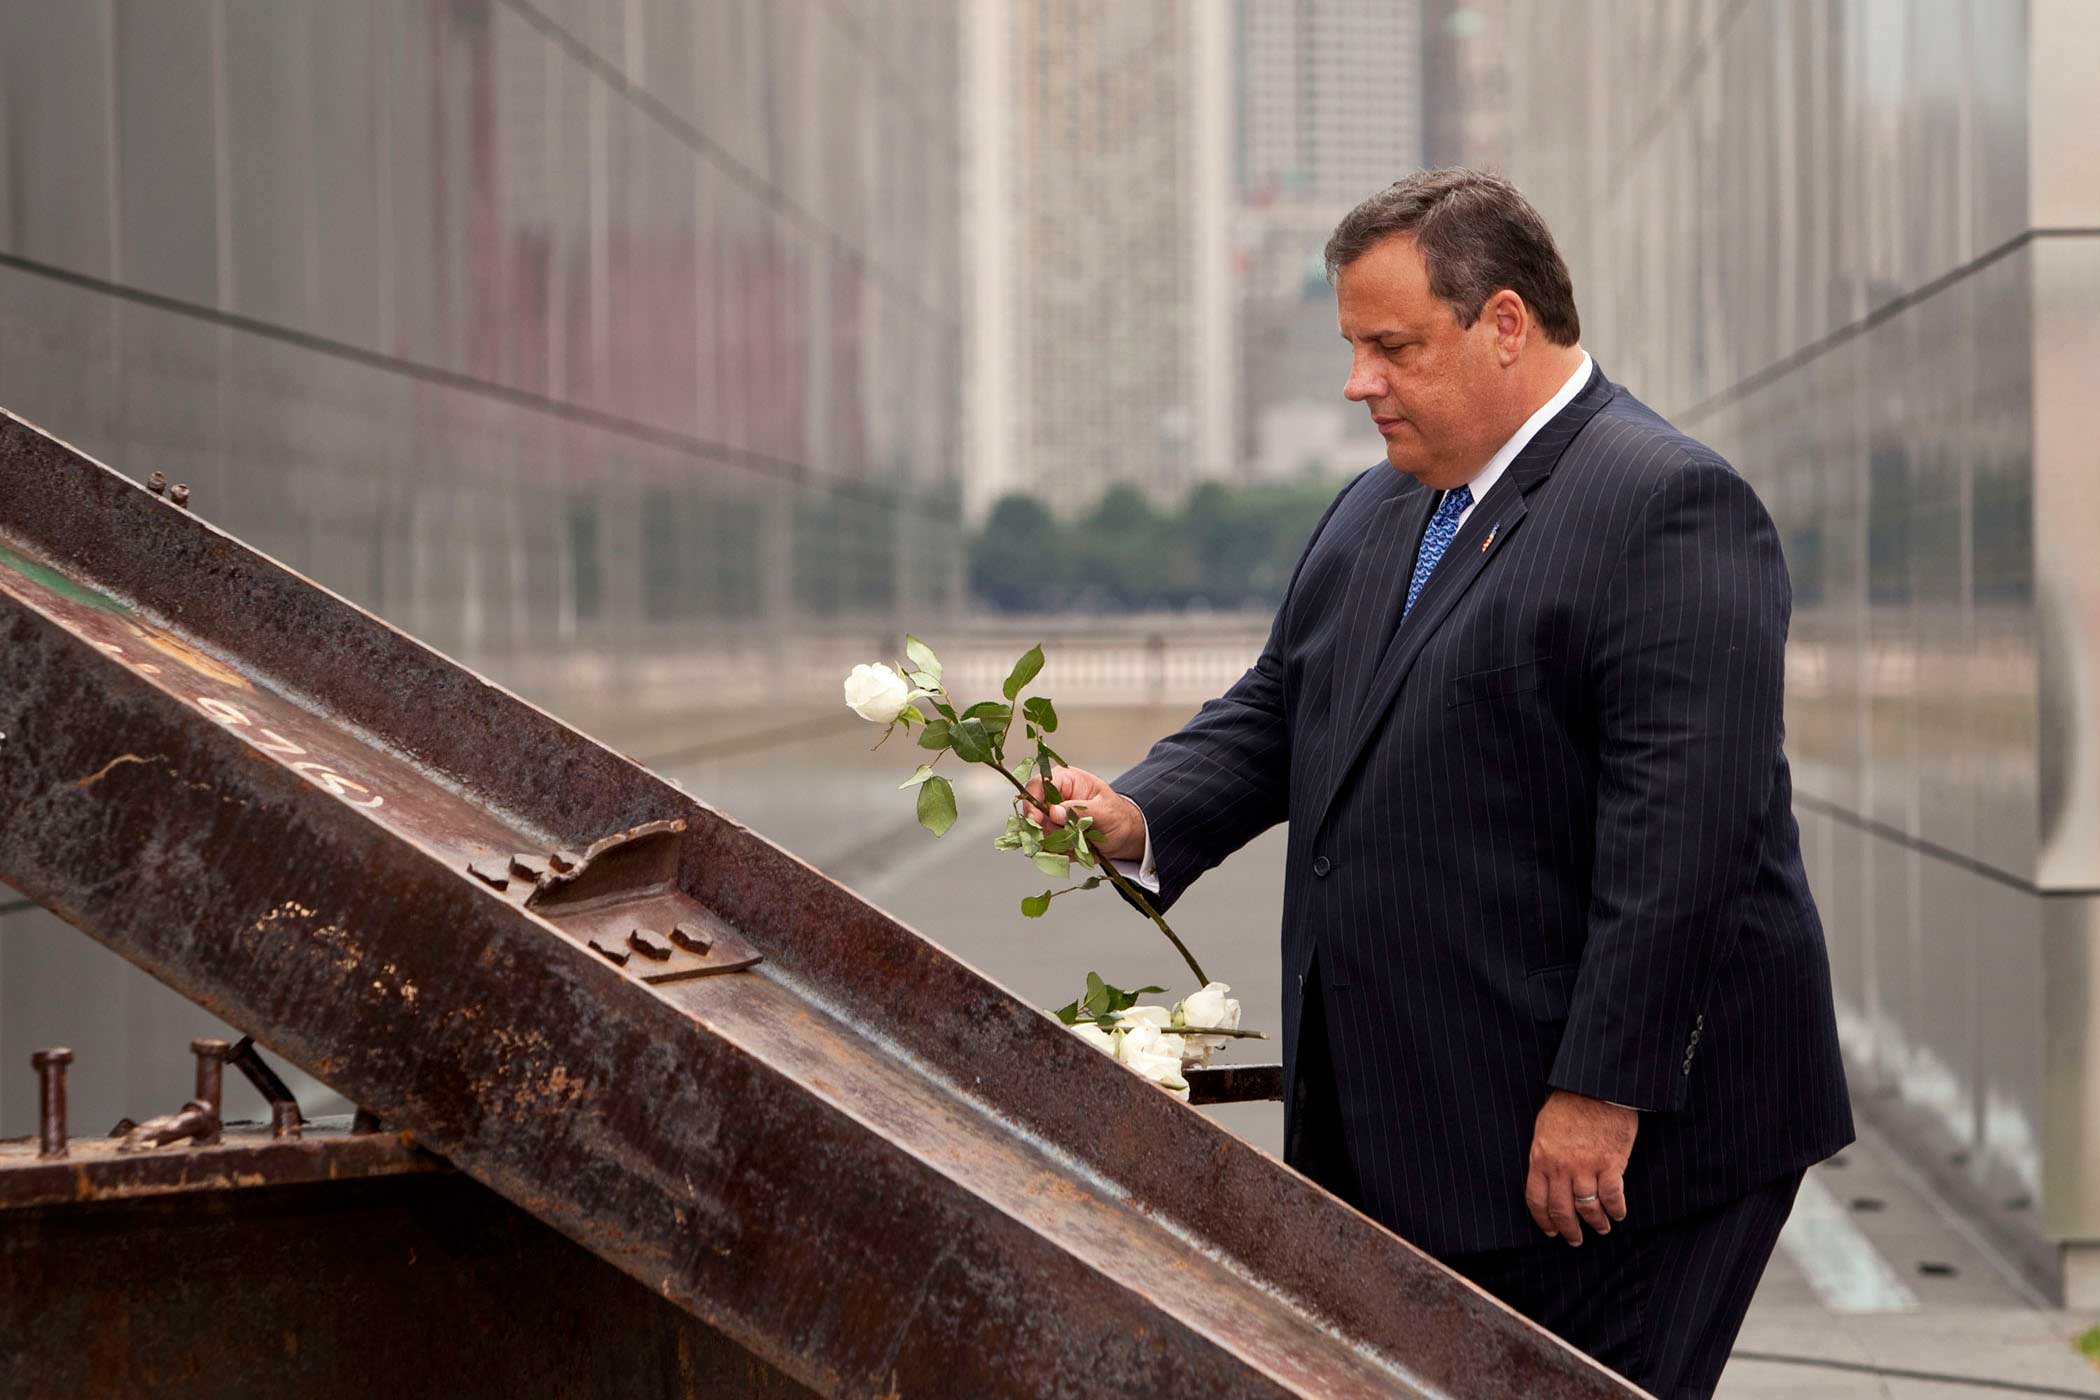 New Jersey Commemorates 9/11 Memorial To 746 Residents Killed In Terror Attacks